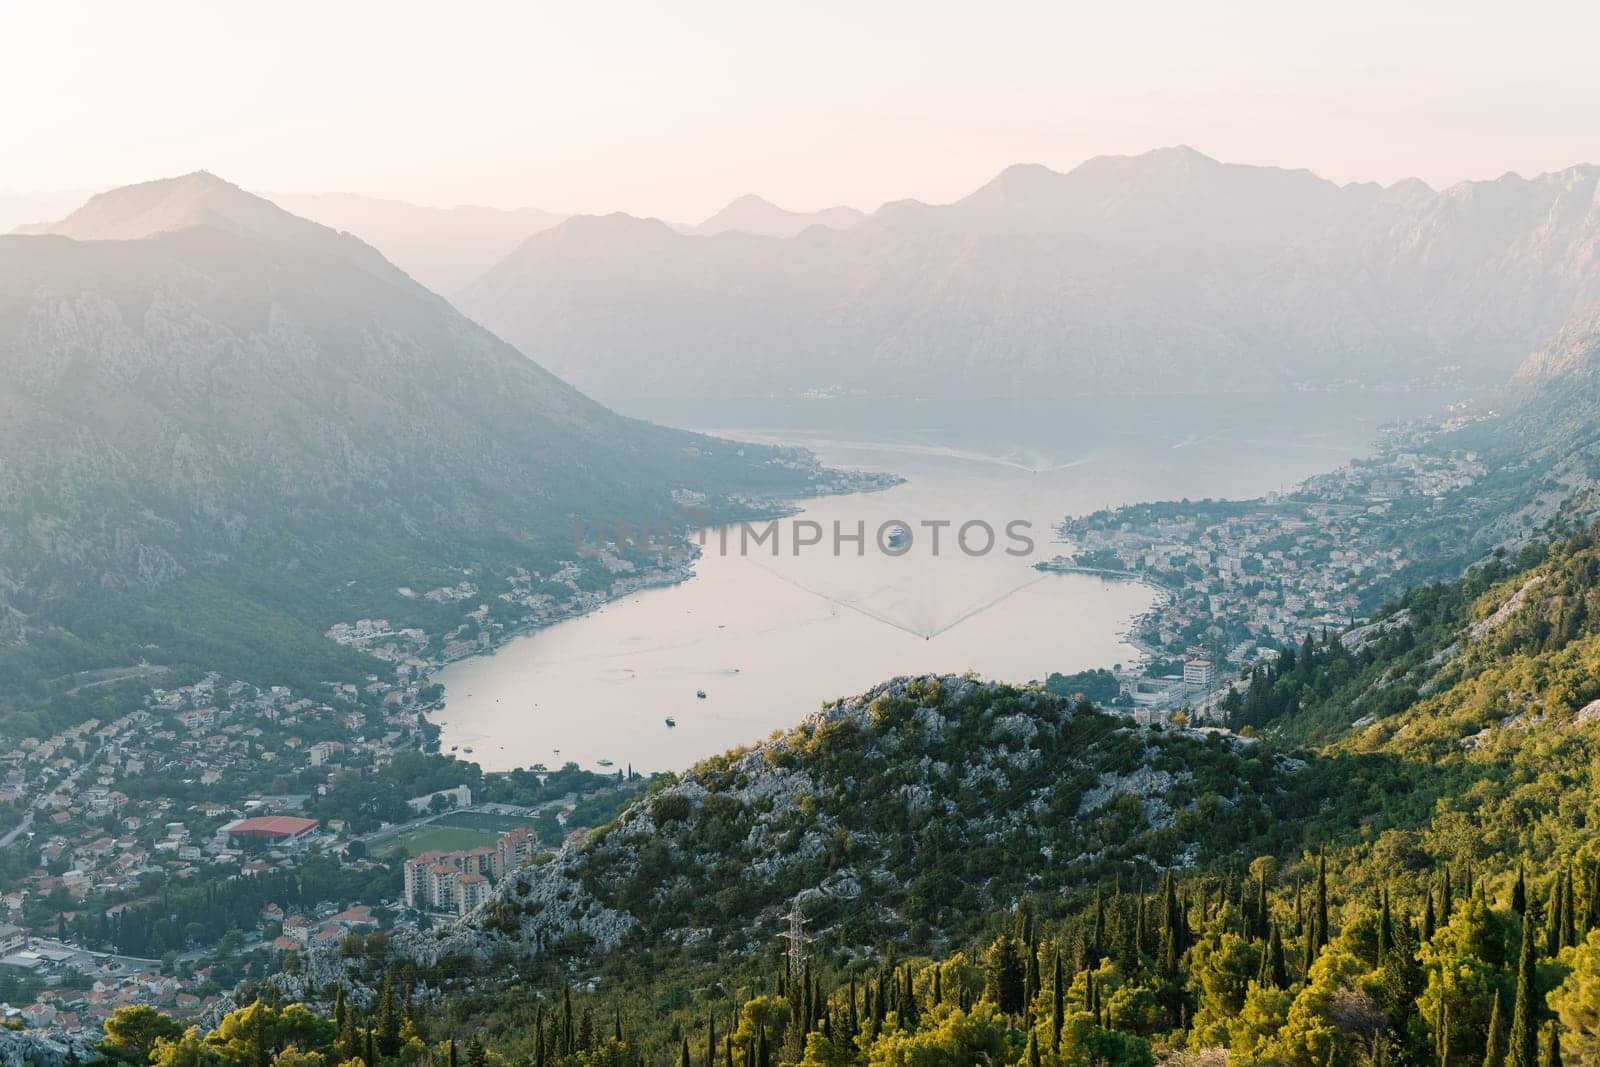 Passenger liner sails along the Bay of Kotor against the backdrop of mountains in the haze. Montenegro by Nadtochiy